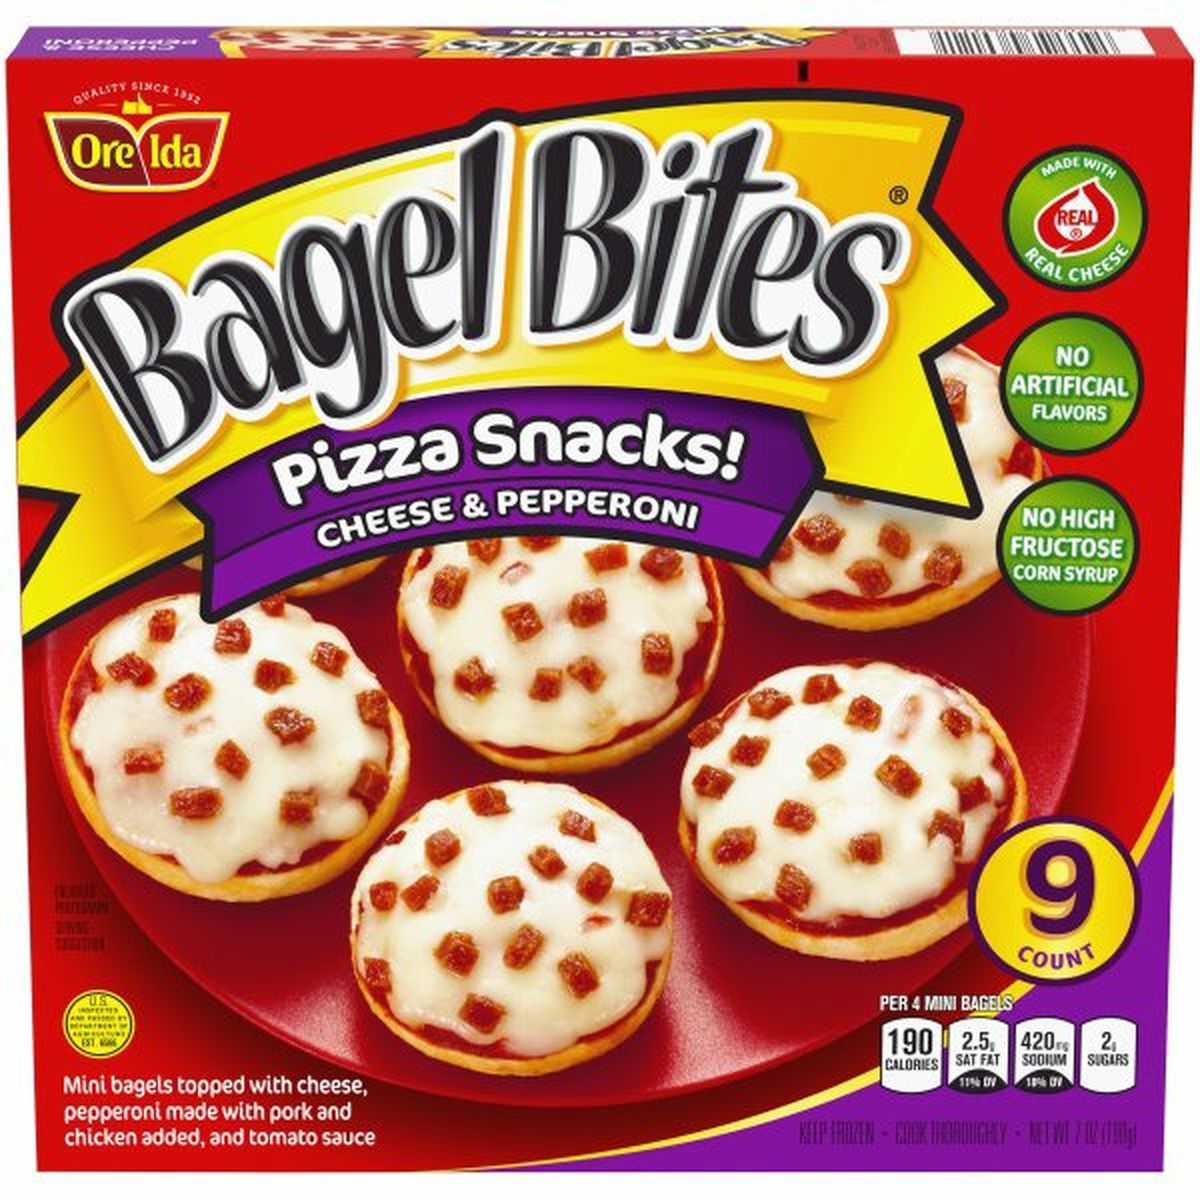 Calories in Bagel Bites Cheese & Pepperoni Pizza Snacks